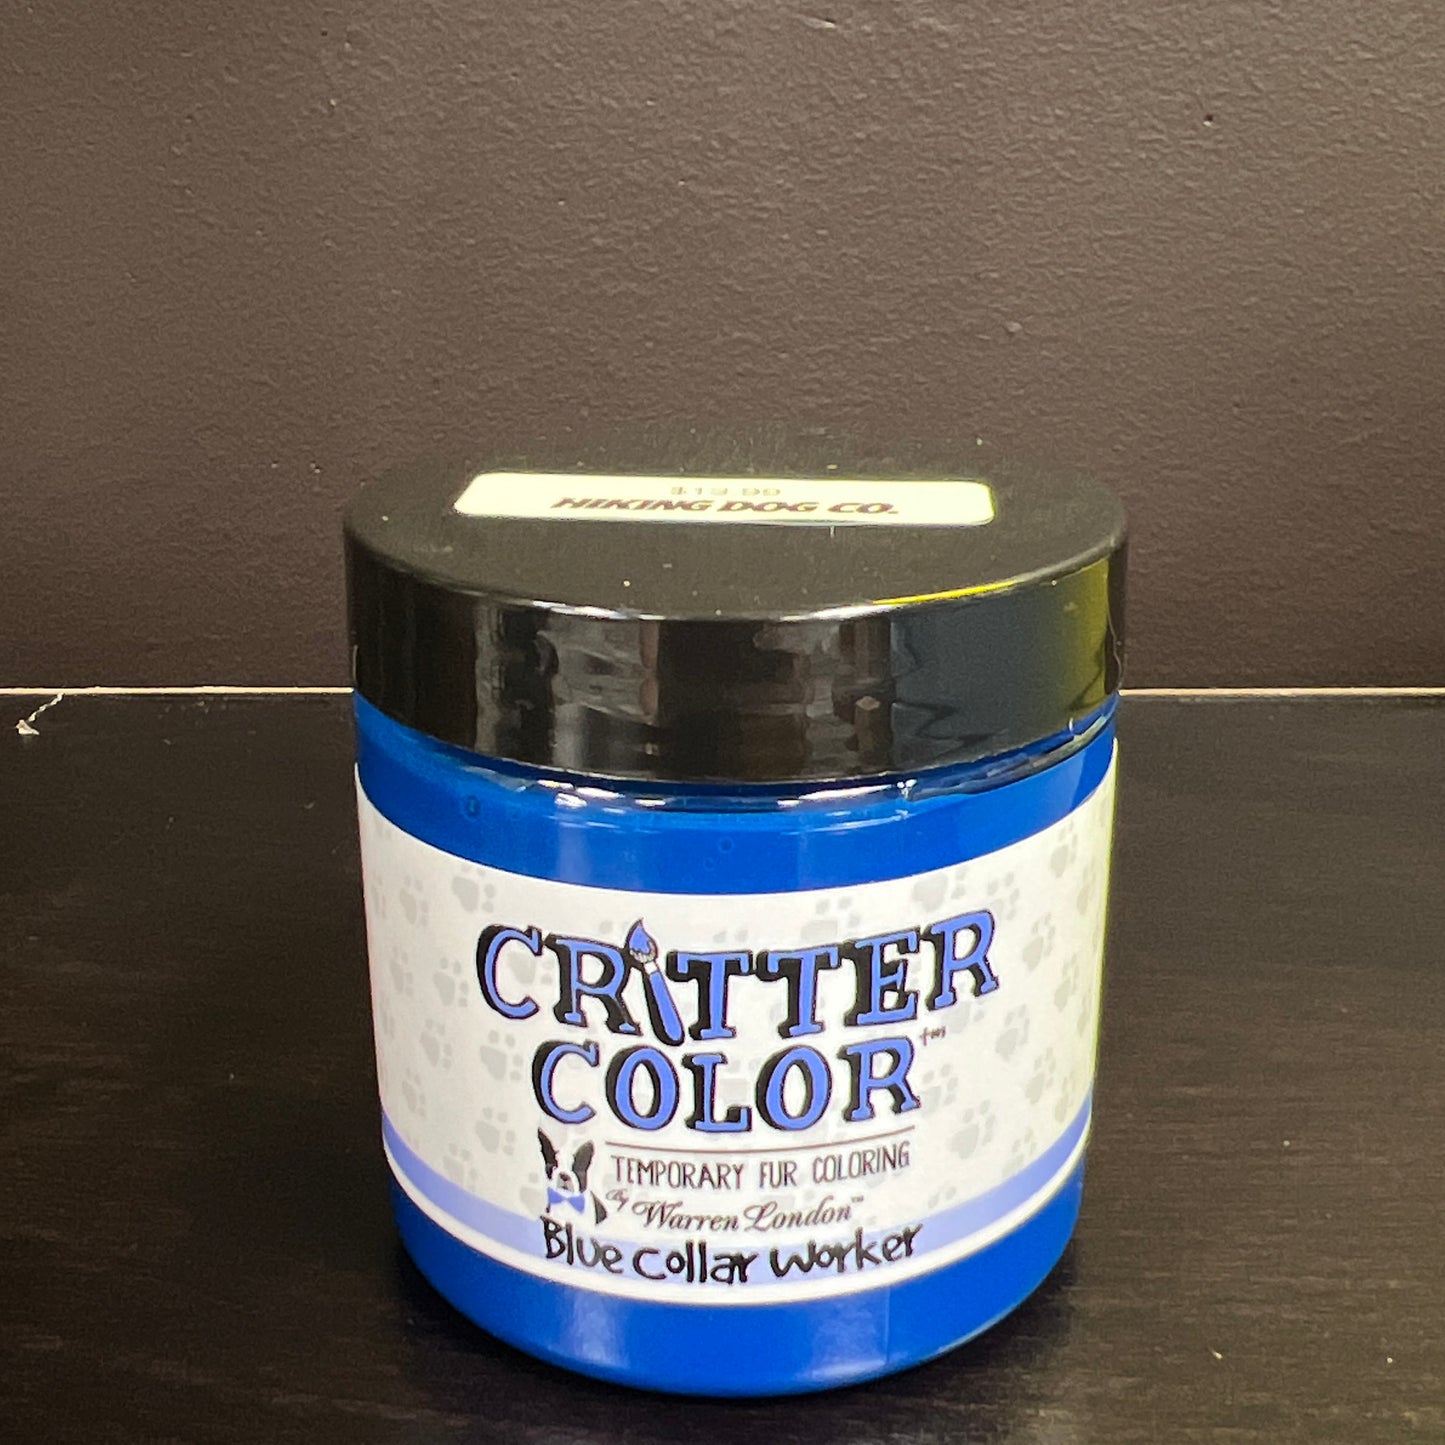 Critter Color - Temporary Fur Coloring